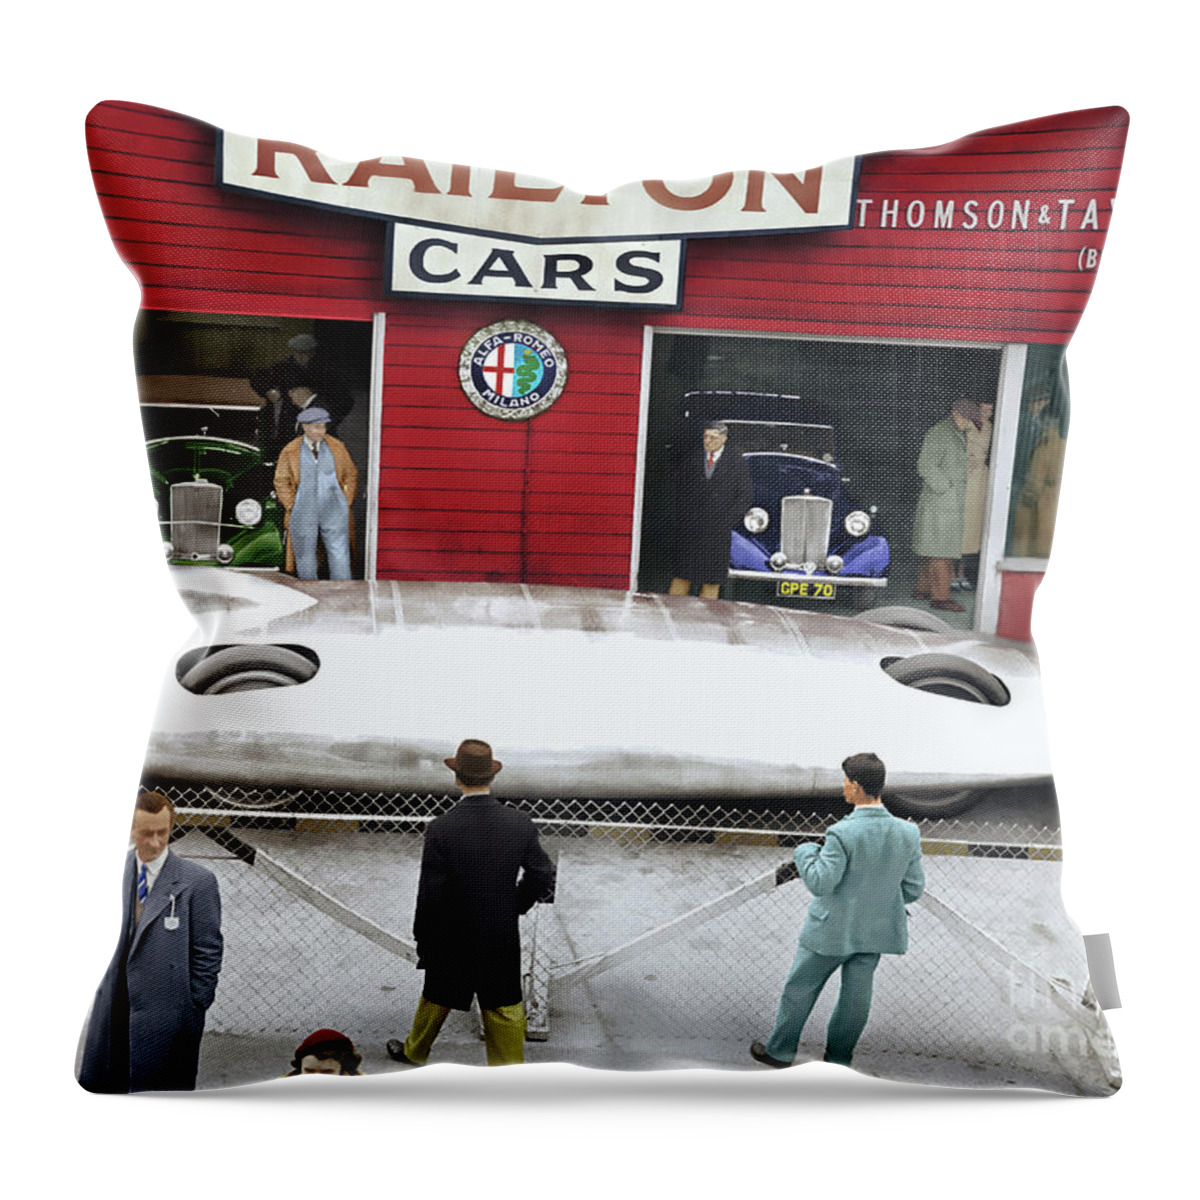 Auto Throw Pillow featuring the photograph Railton Cars by Franchi Torres